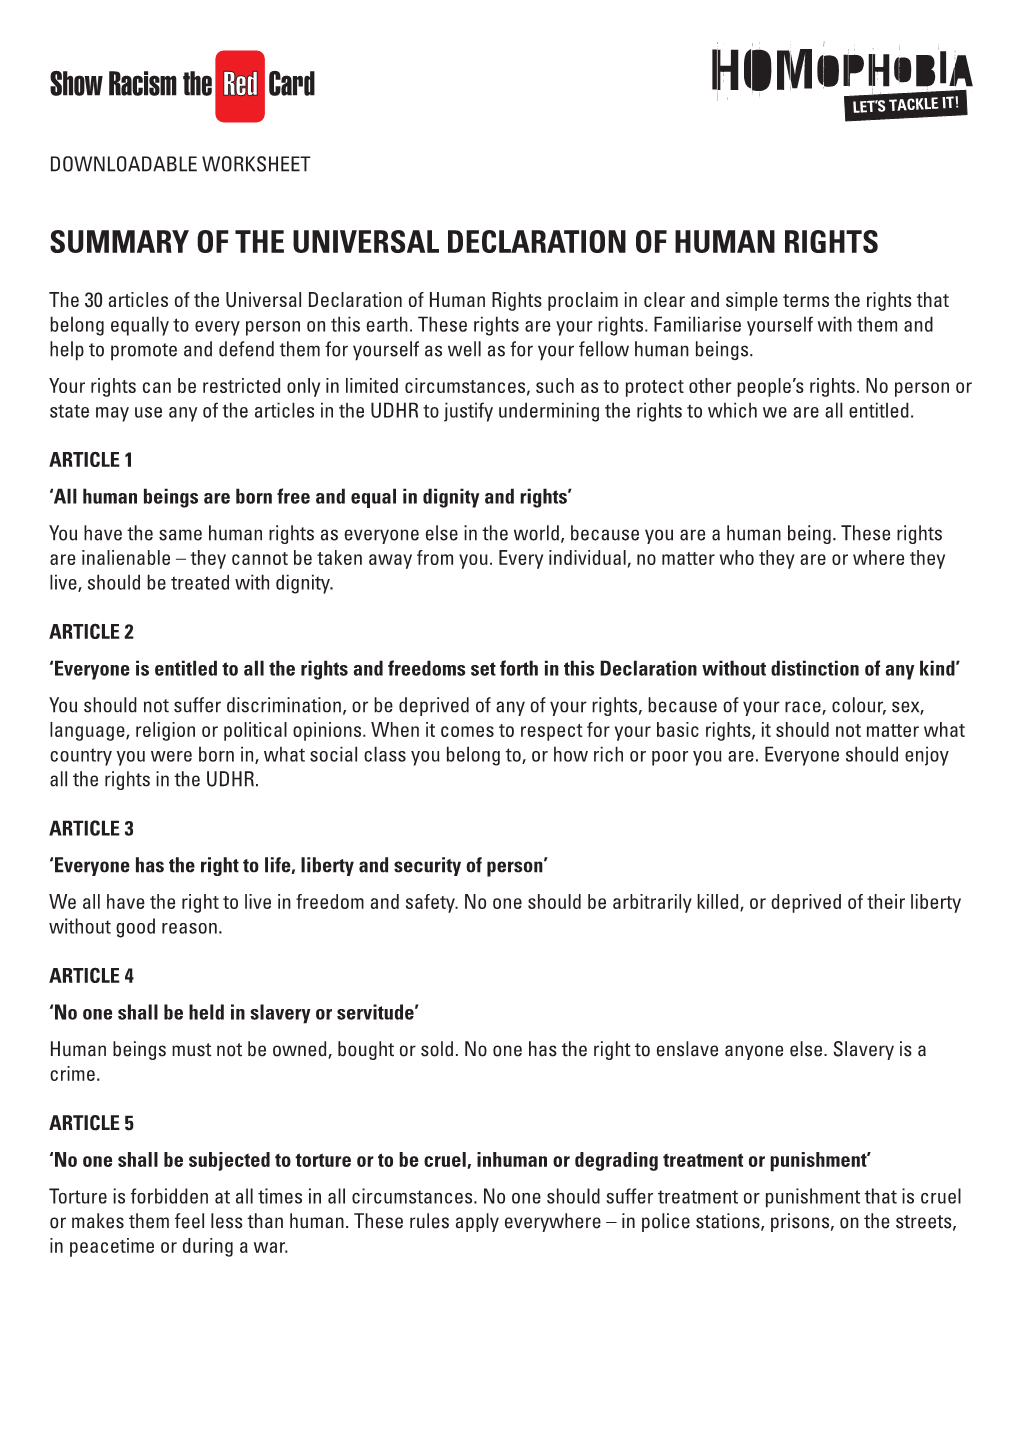 Summary of the Universal Declaration of Human Rights